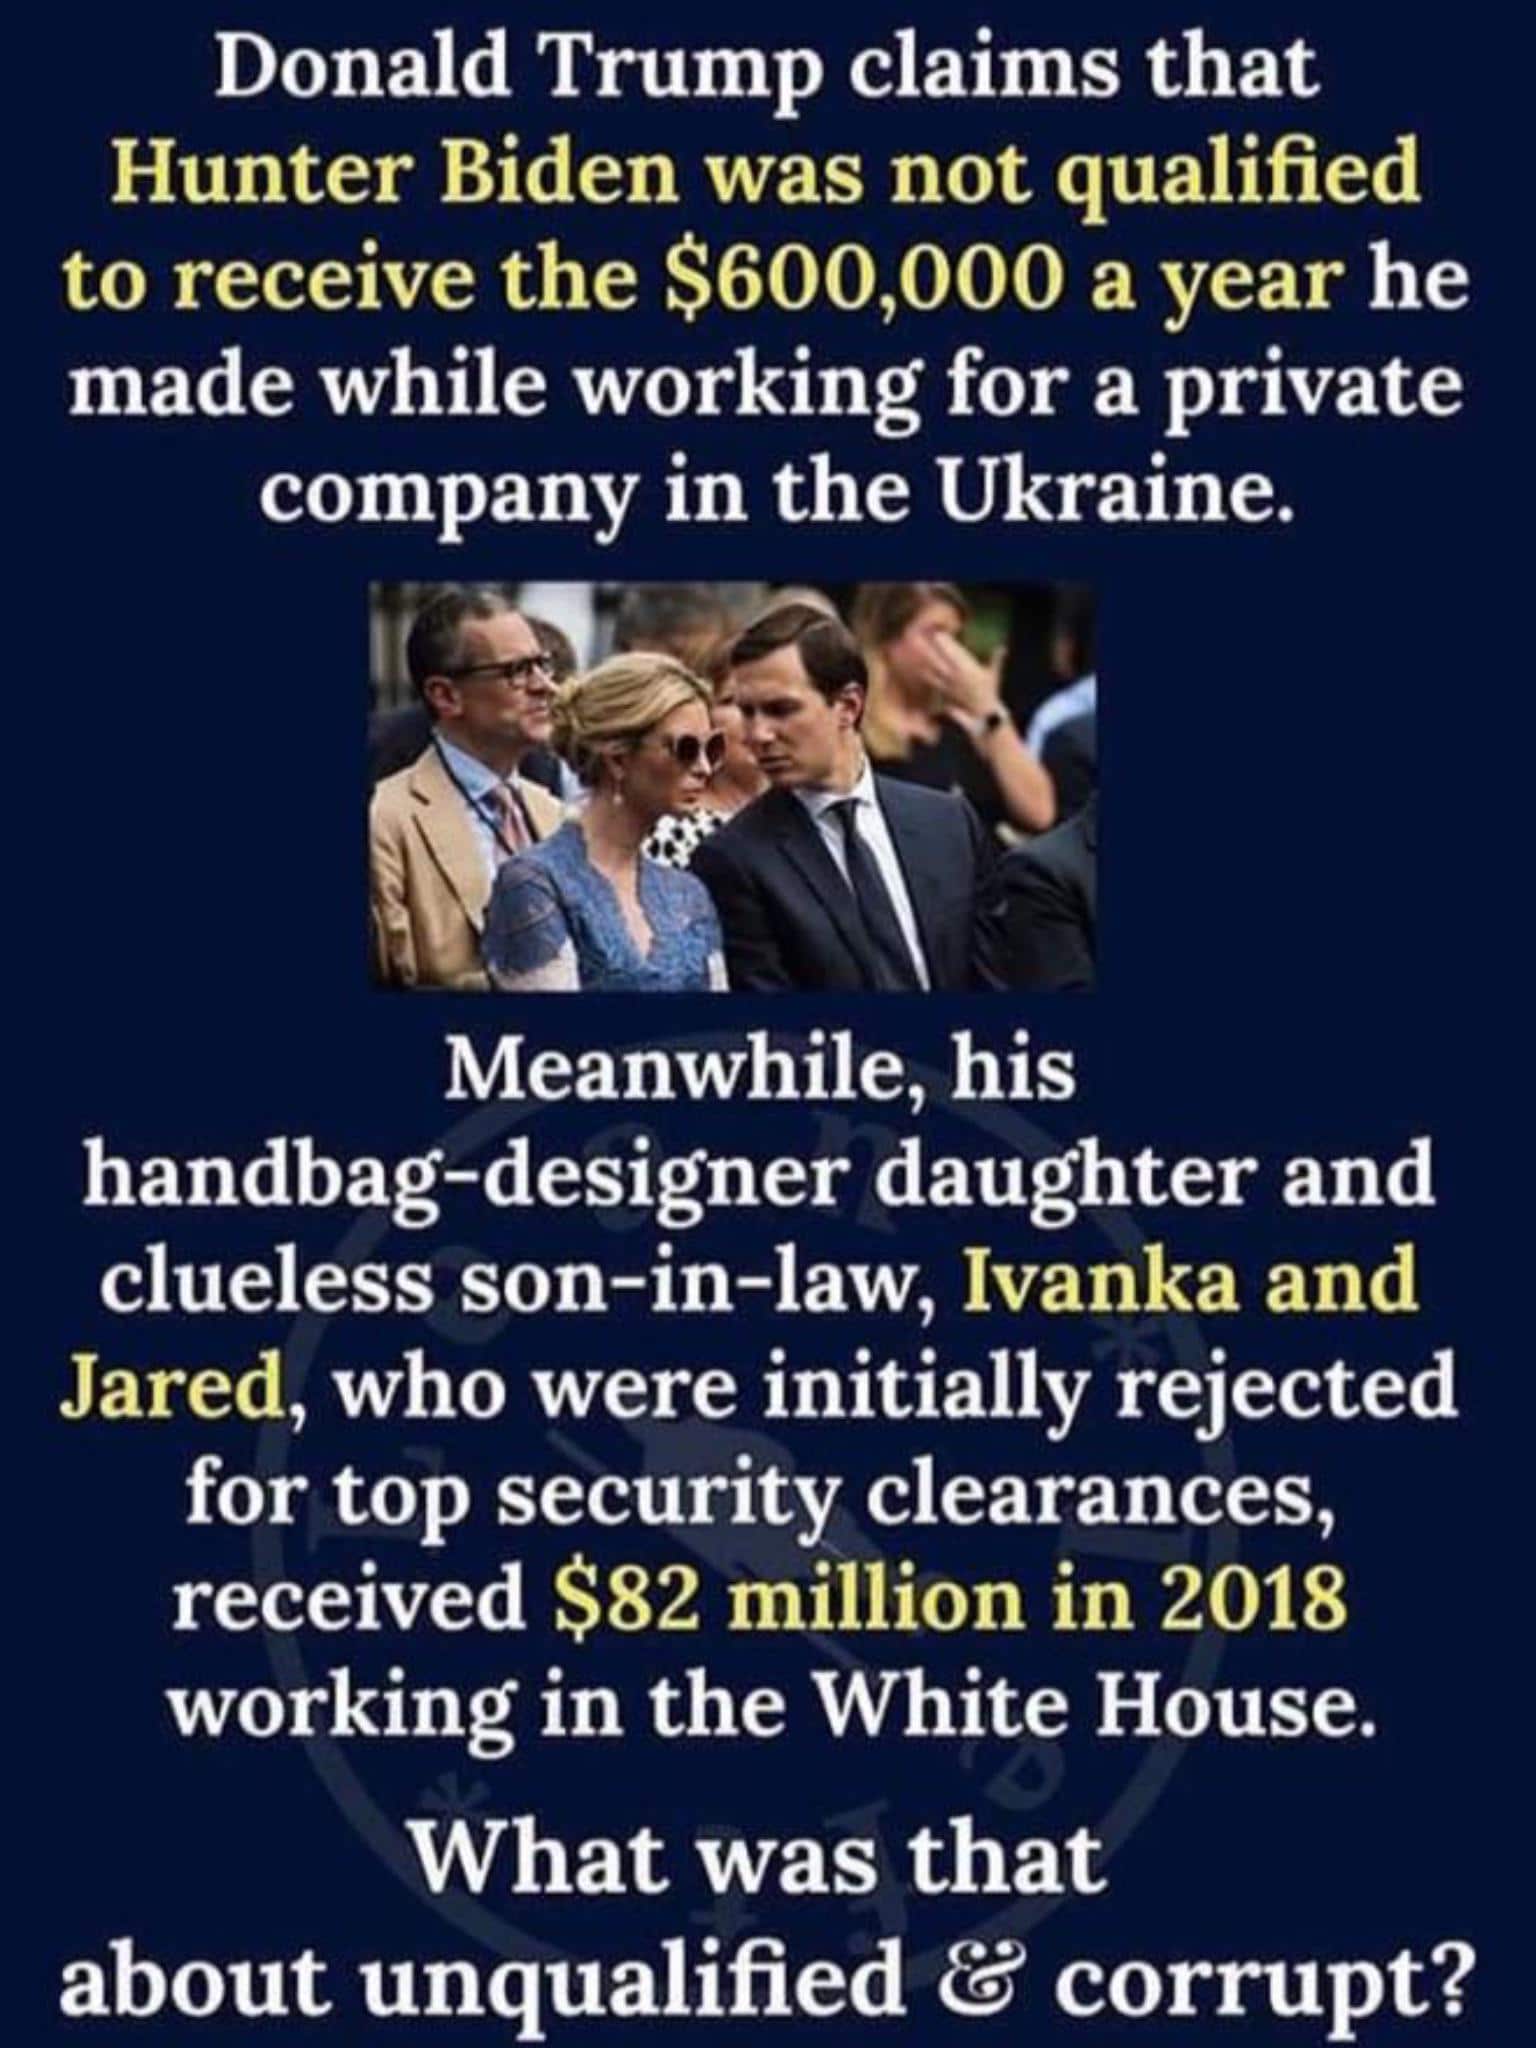 political political-memes political text: Donald Trump claims that Hunter Biden was not qualified to receive the $600,000 a year he made while working for a private company in the Ukraine. Meanwhile, his handbag-designer daughter and clueless son-in-law, Ivanka and Jared, who were initially rejected for top security clearances, received $82 million in 2018 working in the White House. What was that about unqualified & corrupt? 